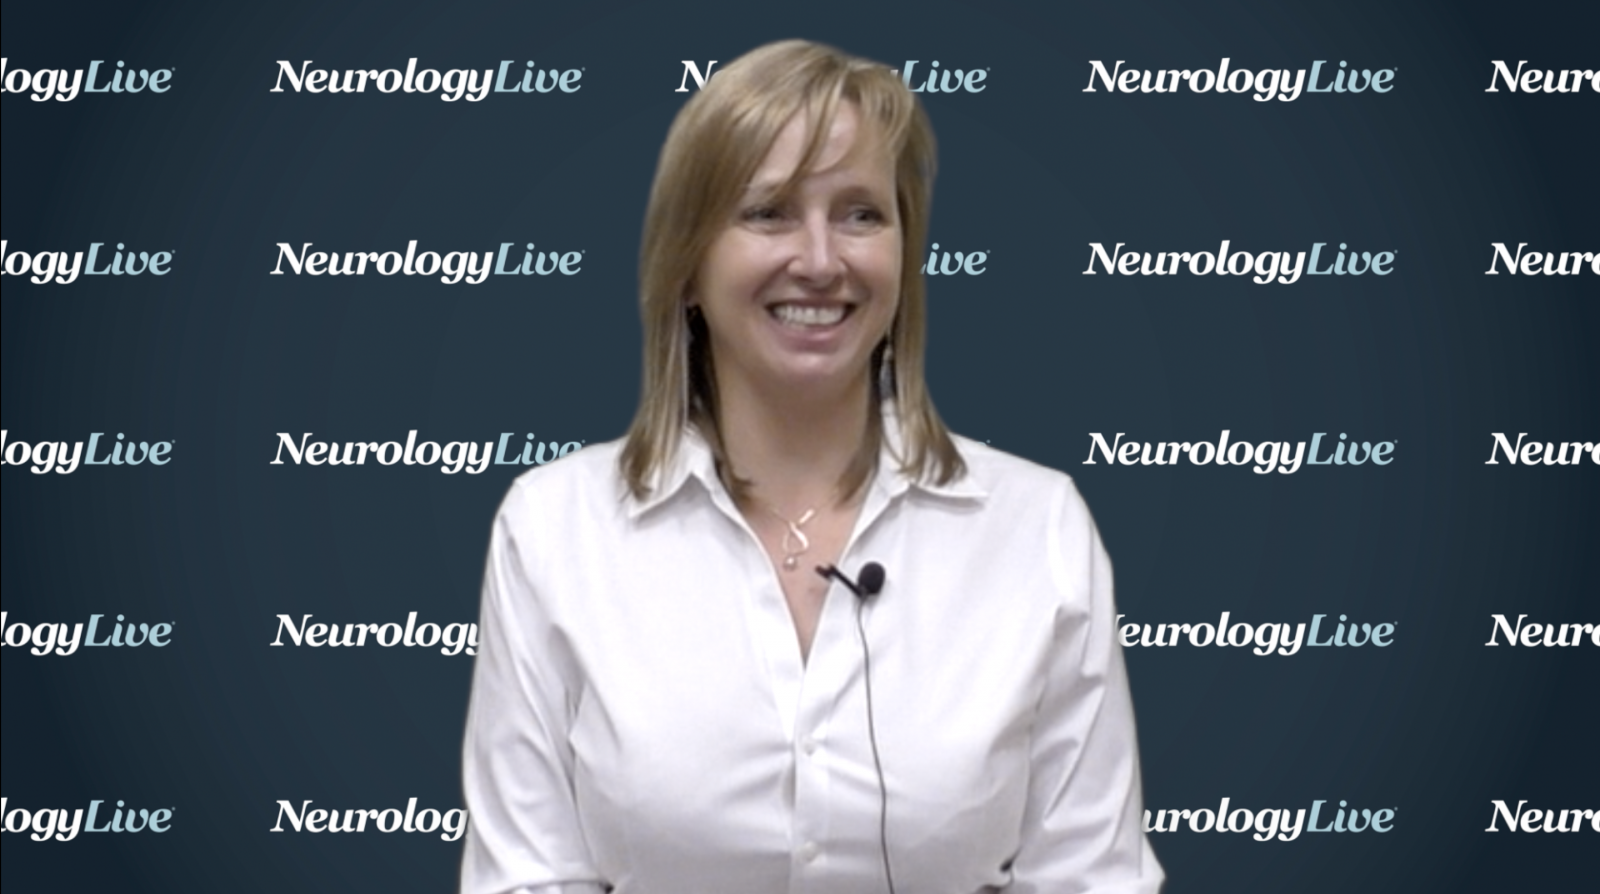 Annette Langer-Gould, MD, PhD: No Increased Risk for Postpartum MS Relapses